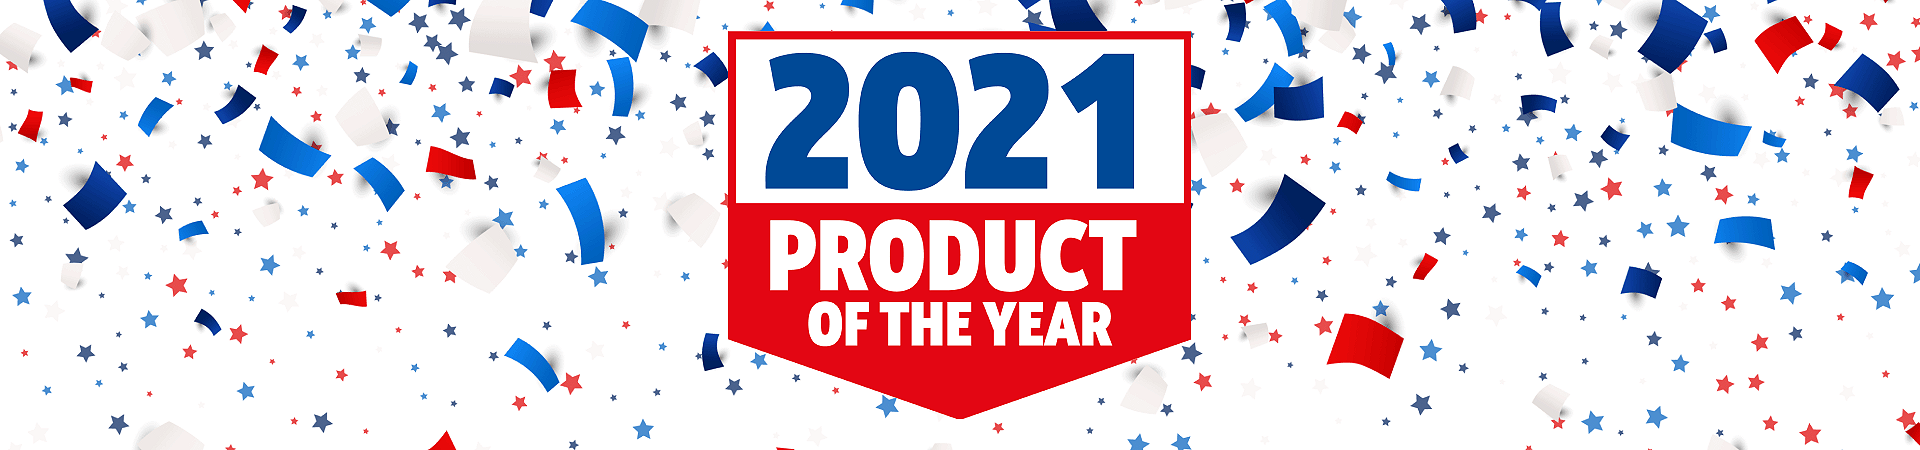 2021 Product of the Year Badge